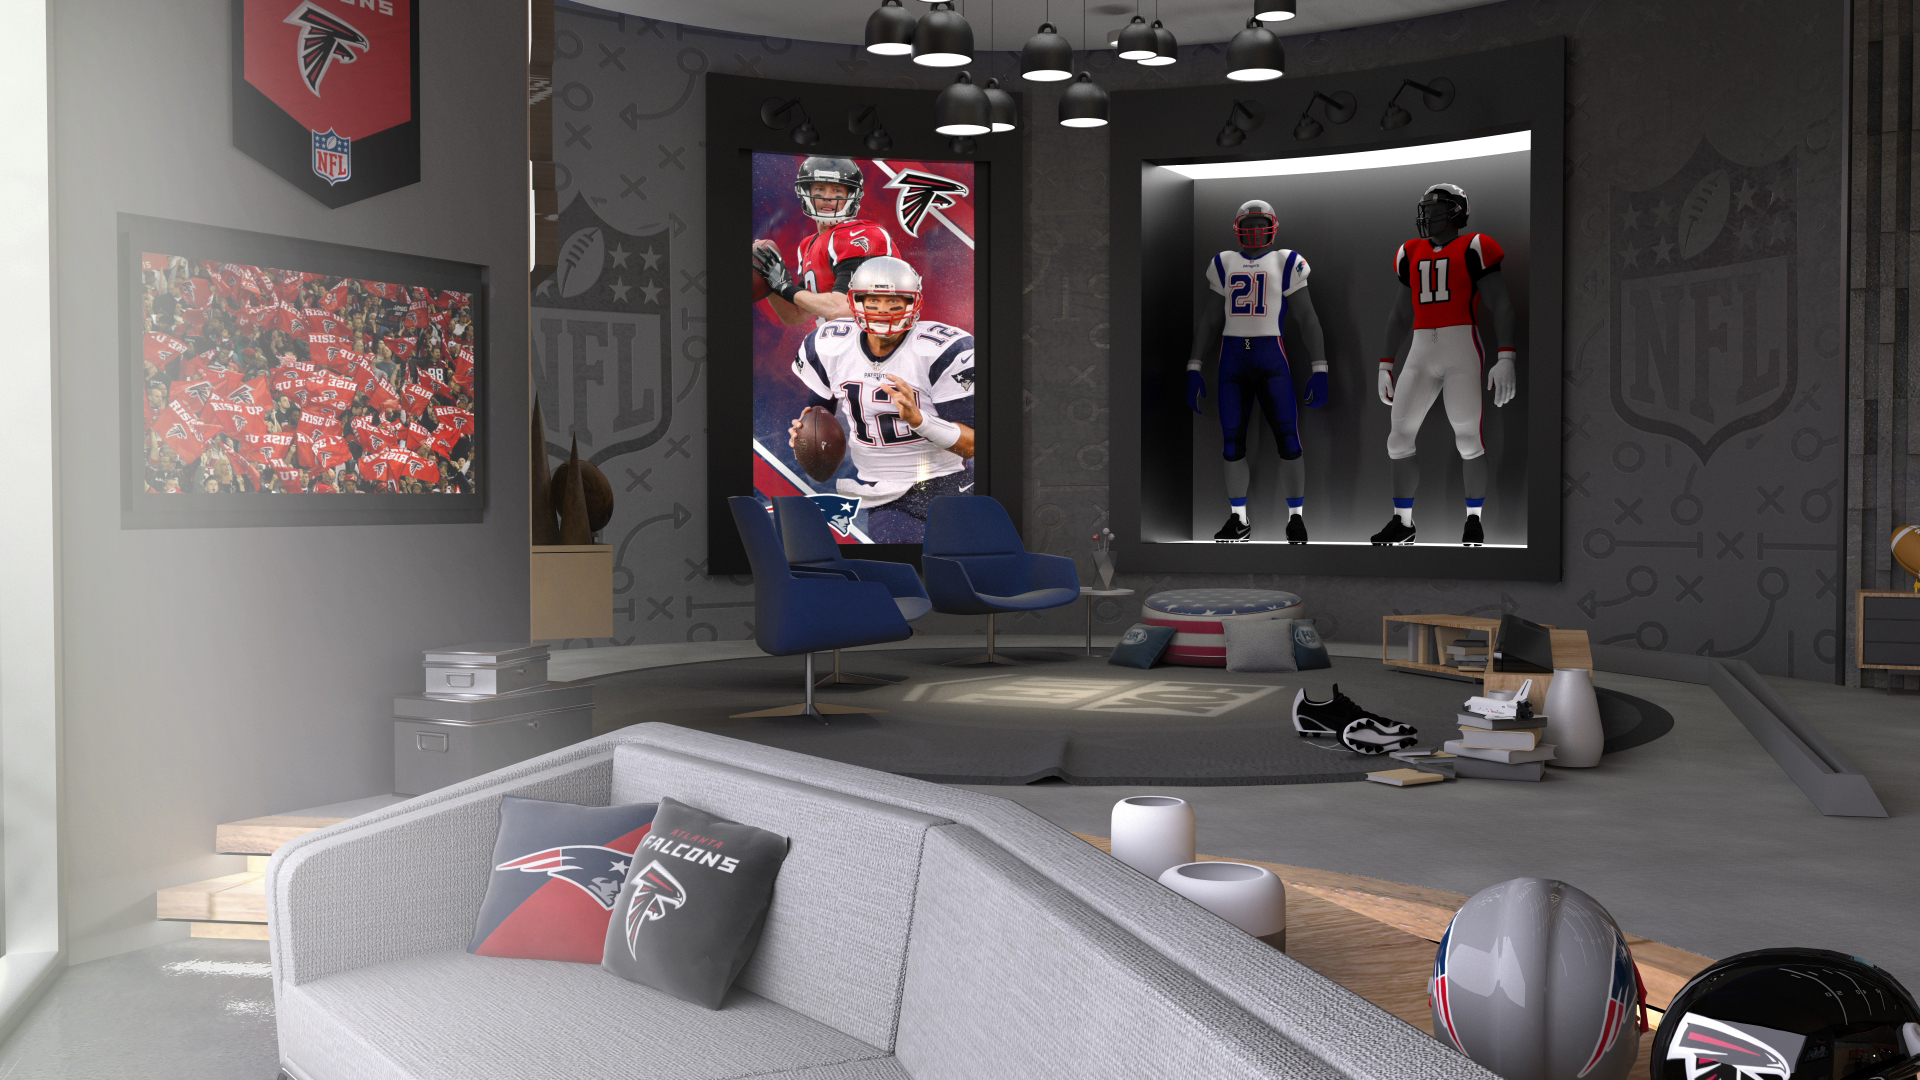 Here’s how to watch Super Bowl highlights in VR during the game | TechCrunch